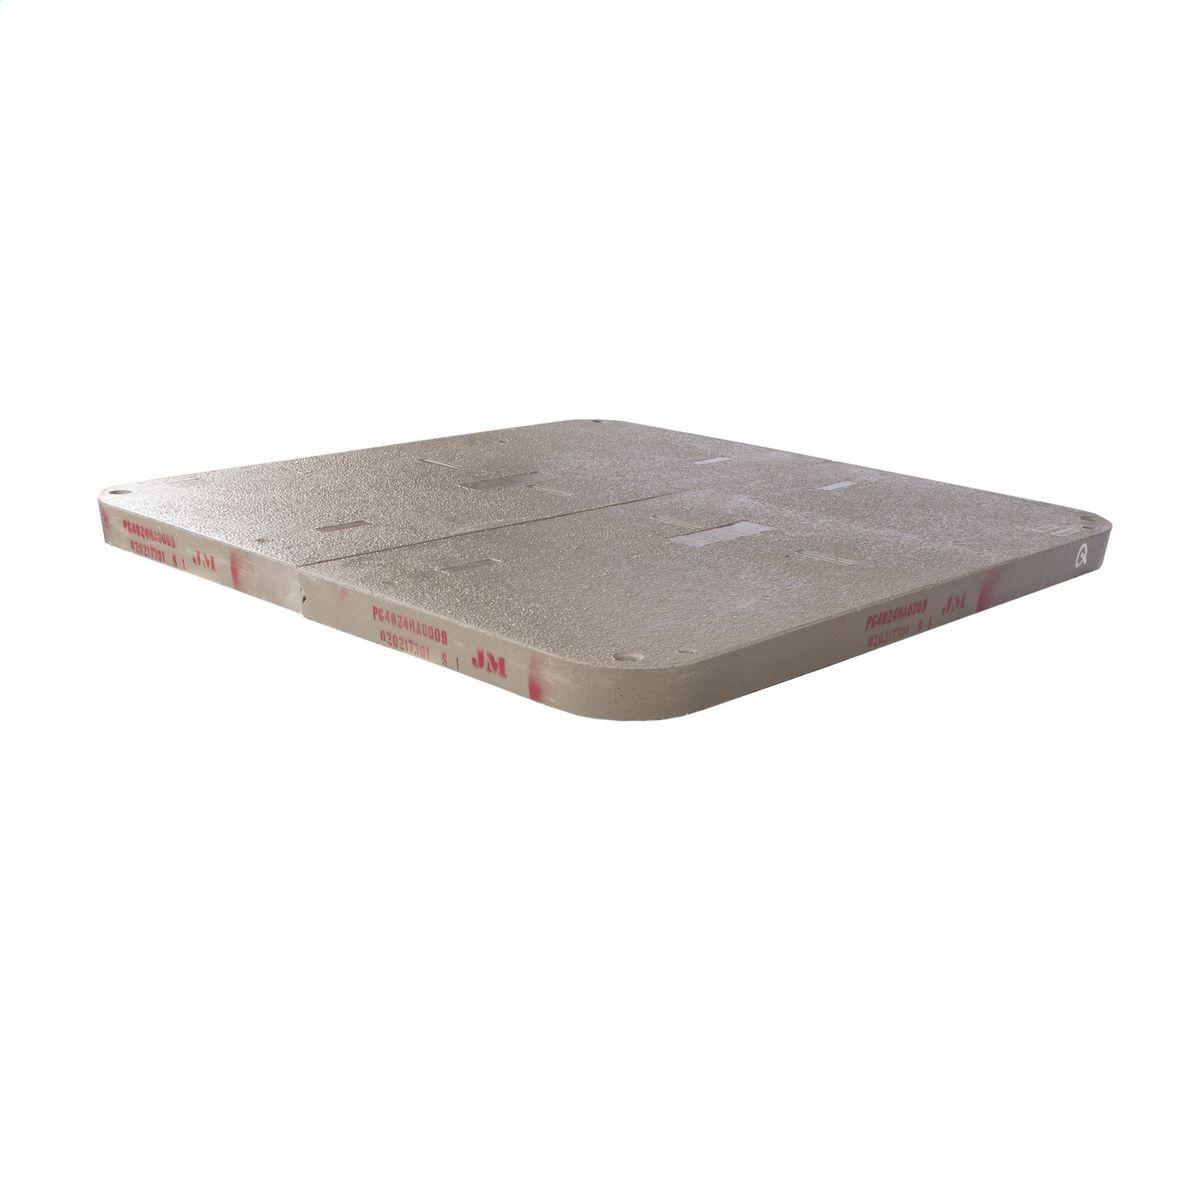 Hubbell PG3672HH0017 Cover, Polymer Concrete, Extra Heavy Duty Tier 22, 36"x72"x3", 2-piece w/ 2 Bolts, Electric Logo 